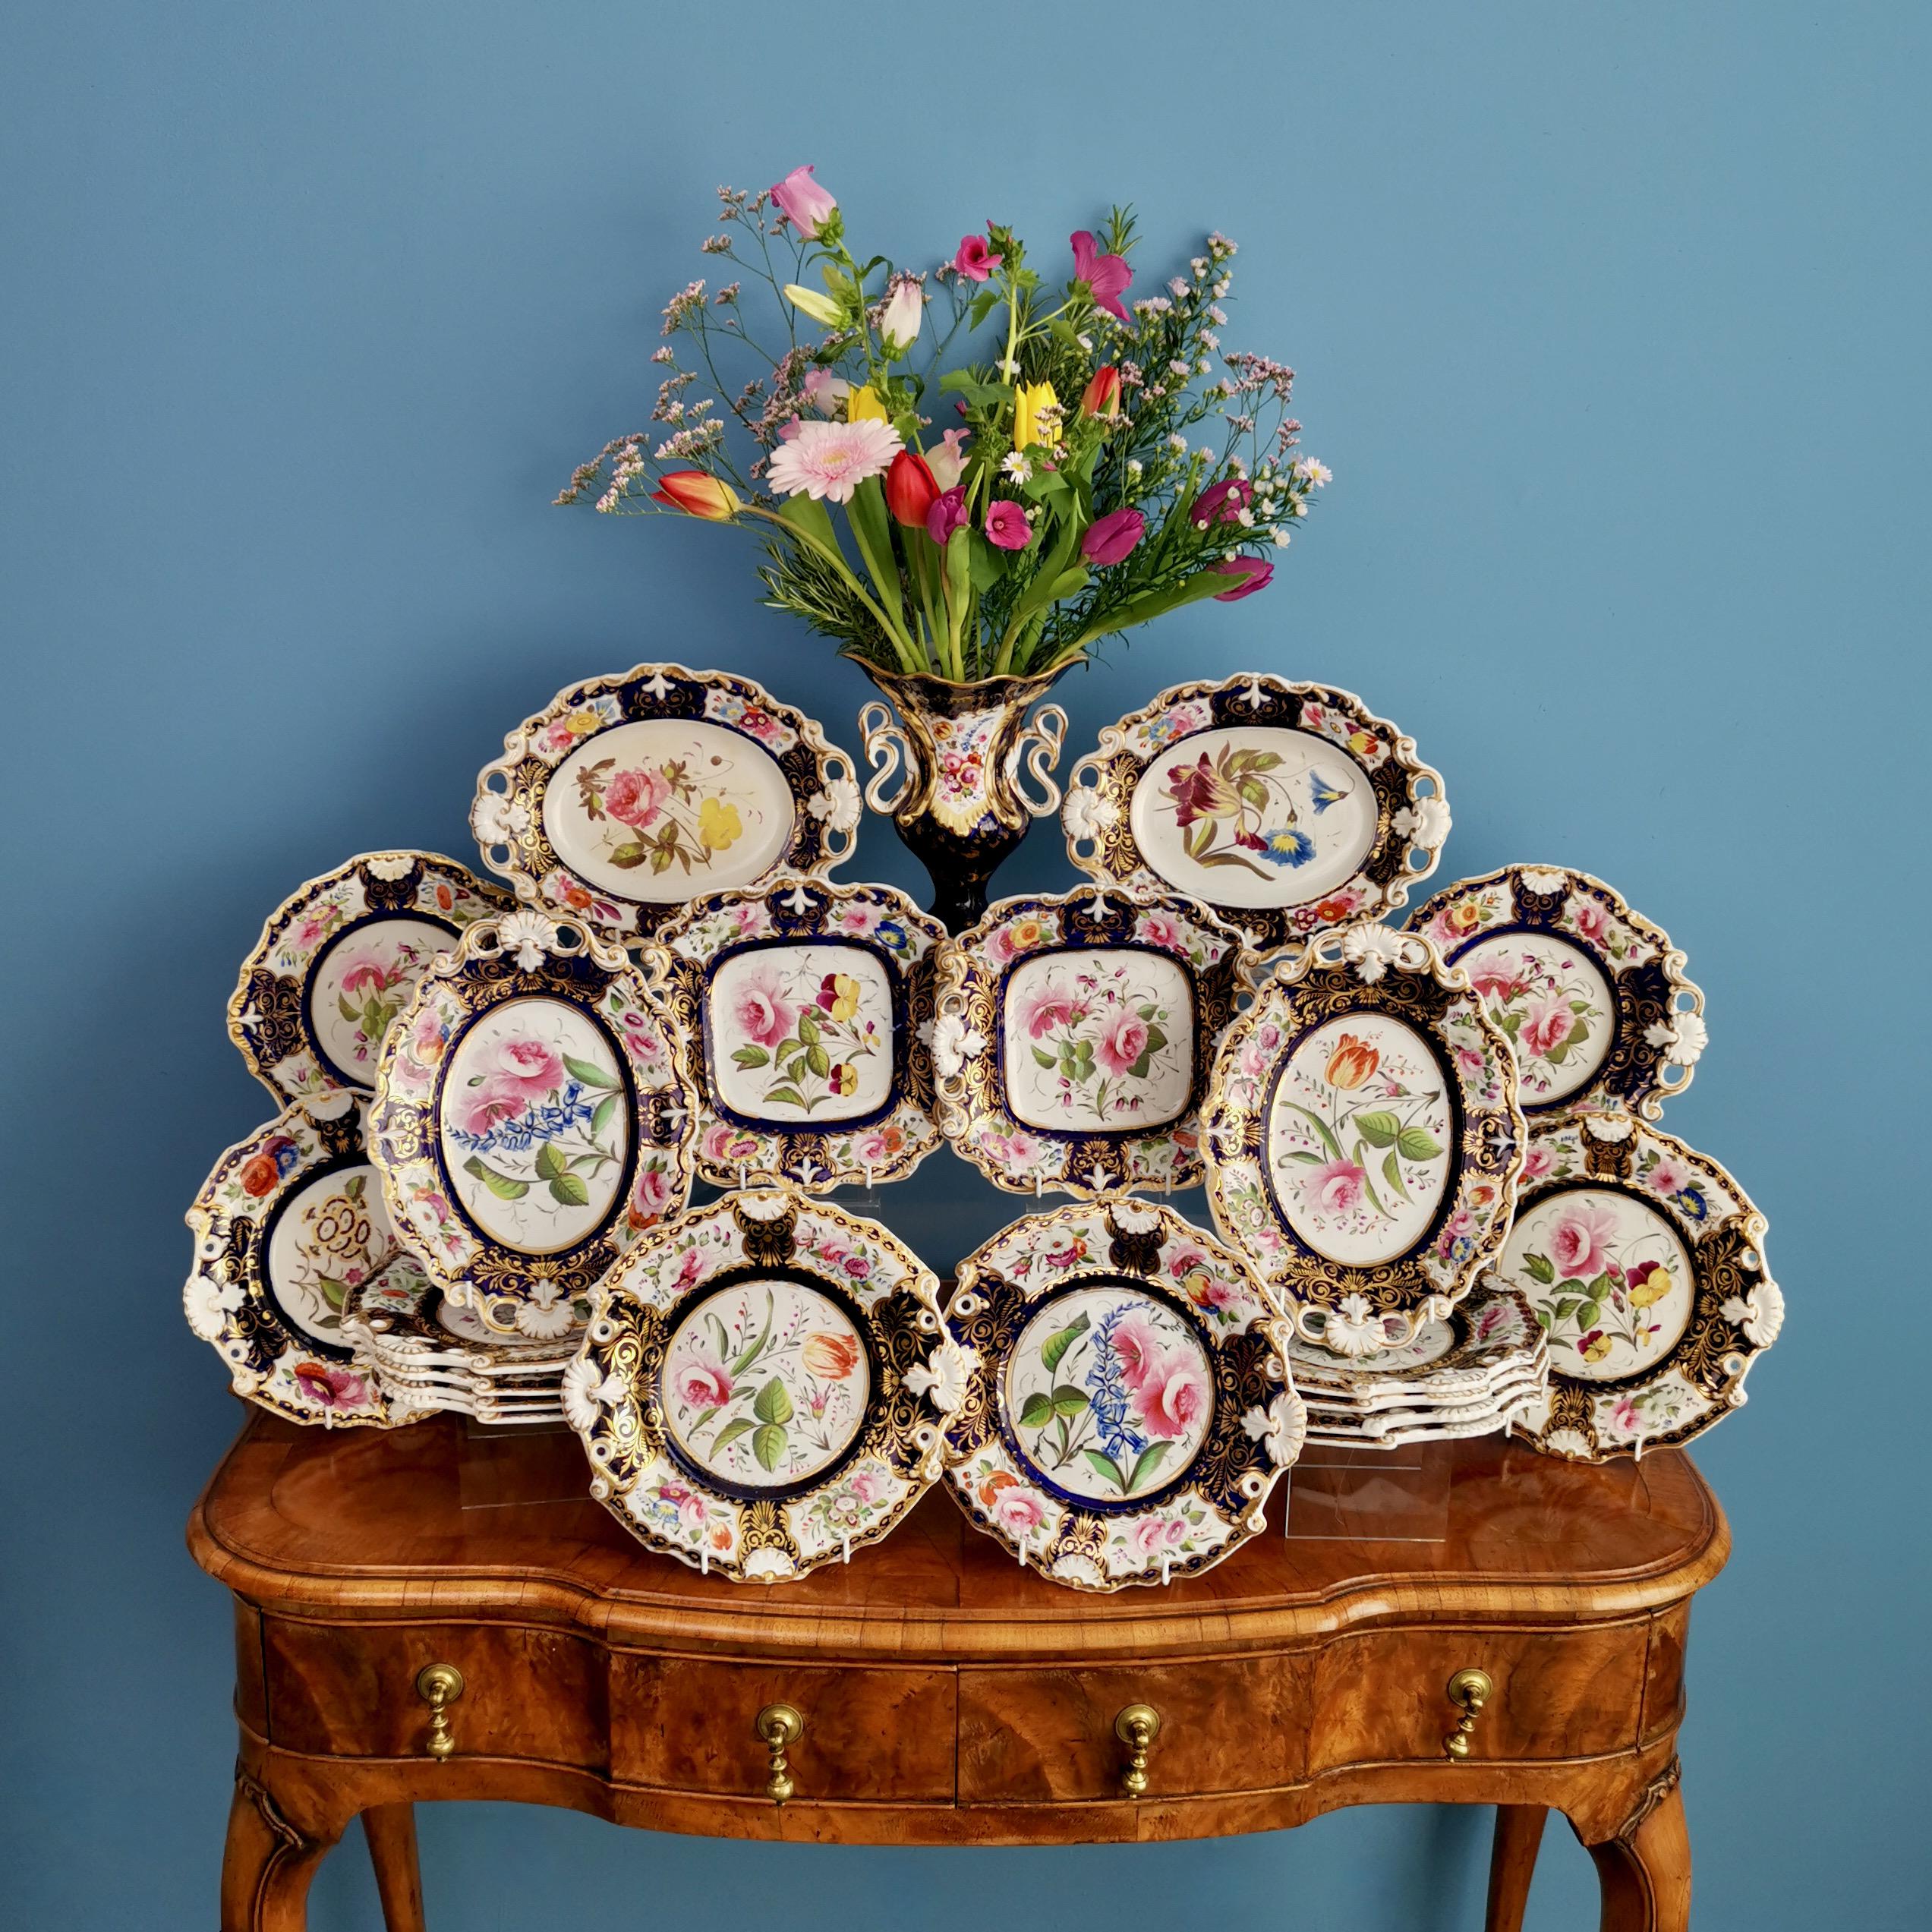 This is a very striking and rare dessert service made by New Hall between 1824 and 1830. The service consists of 12 plates, 2 one-handled serving dishes, 2 square serving dishes, and 4 oval serving dishes. 

I have a smaller set available by the